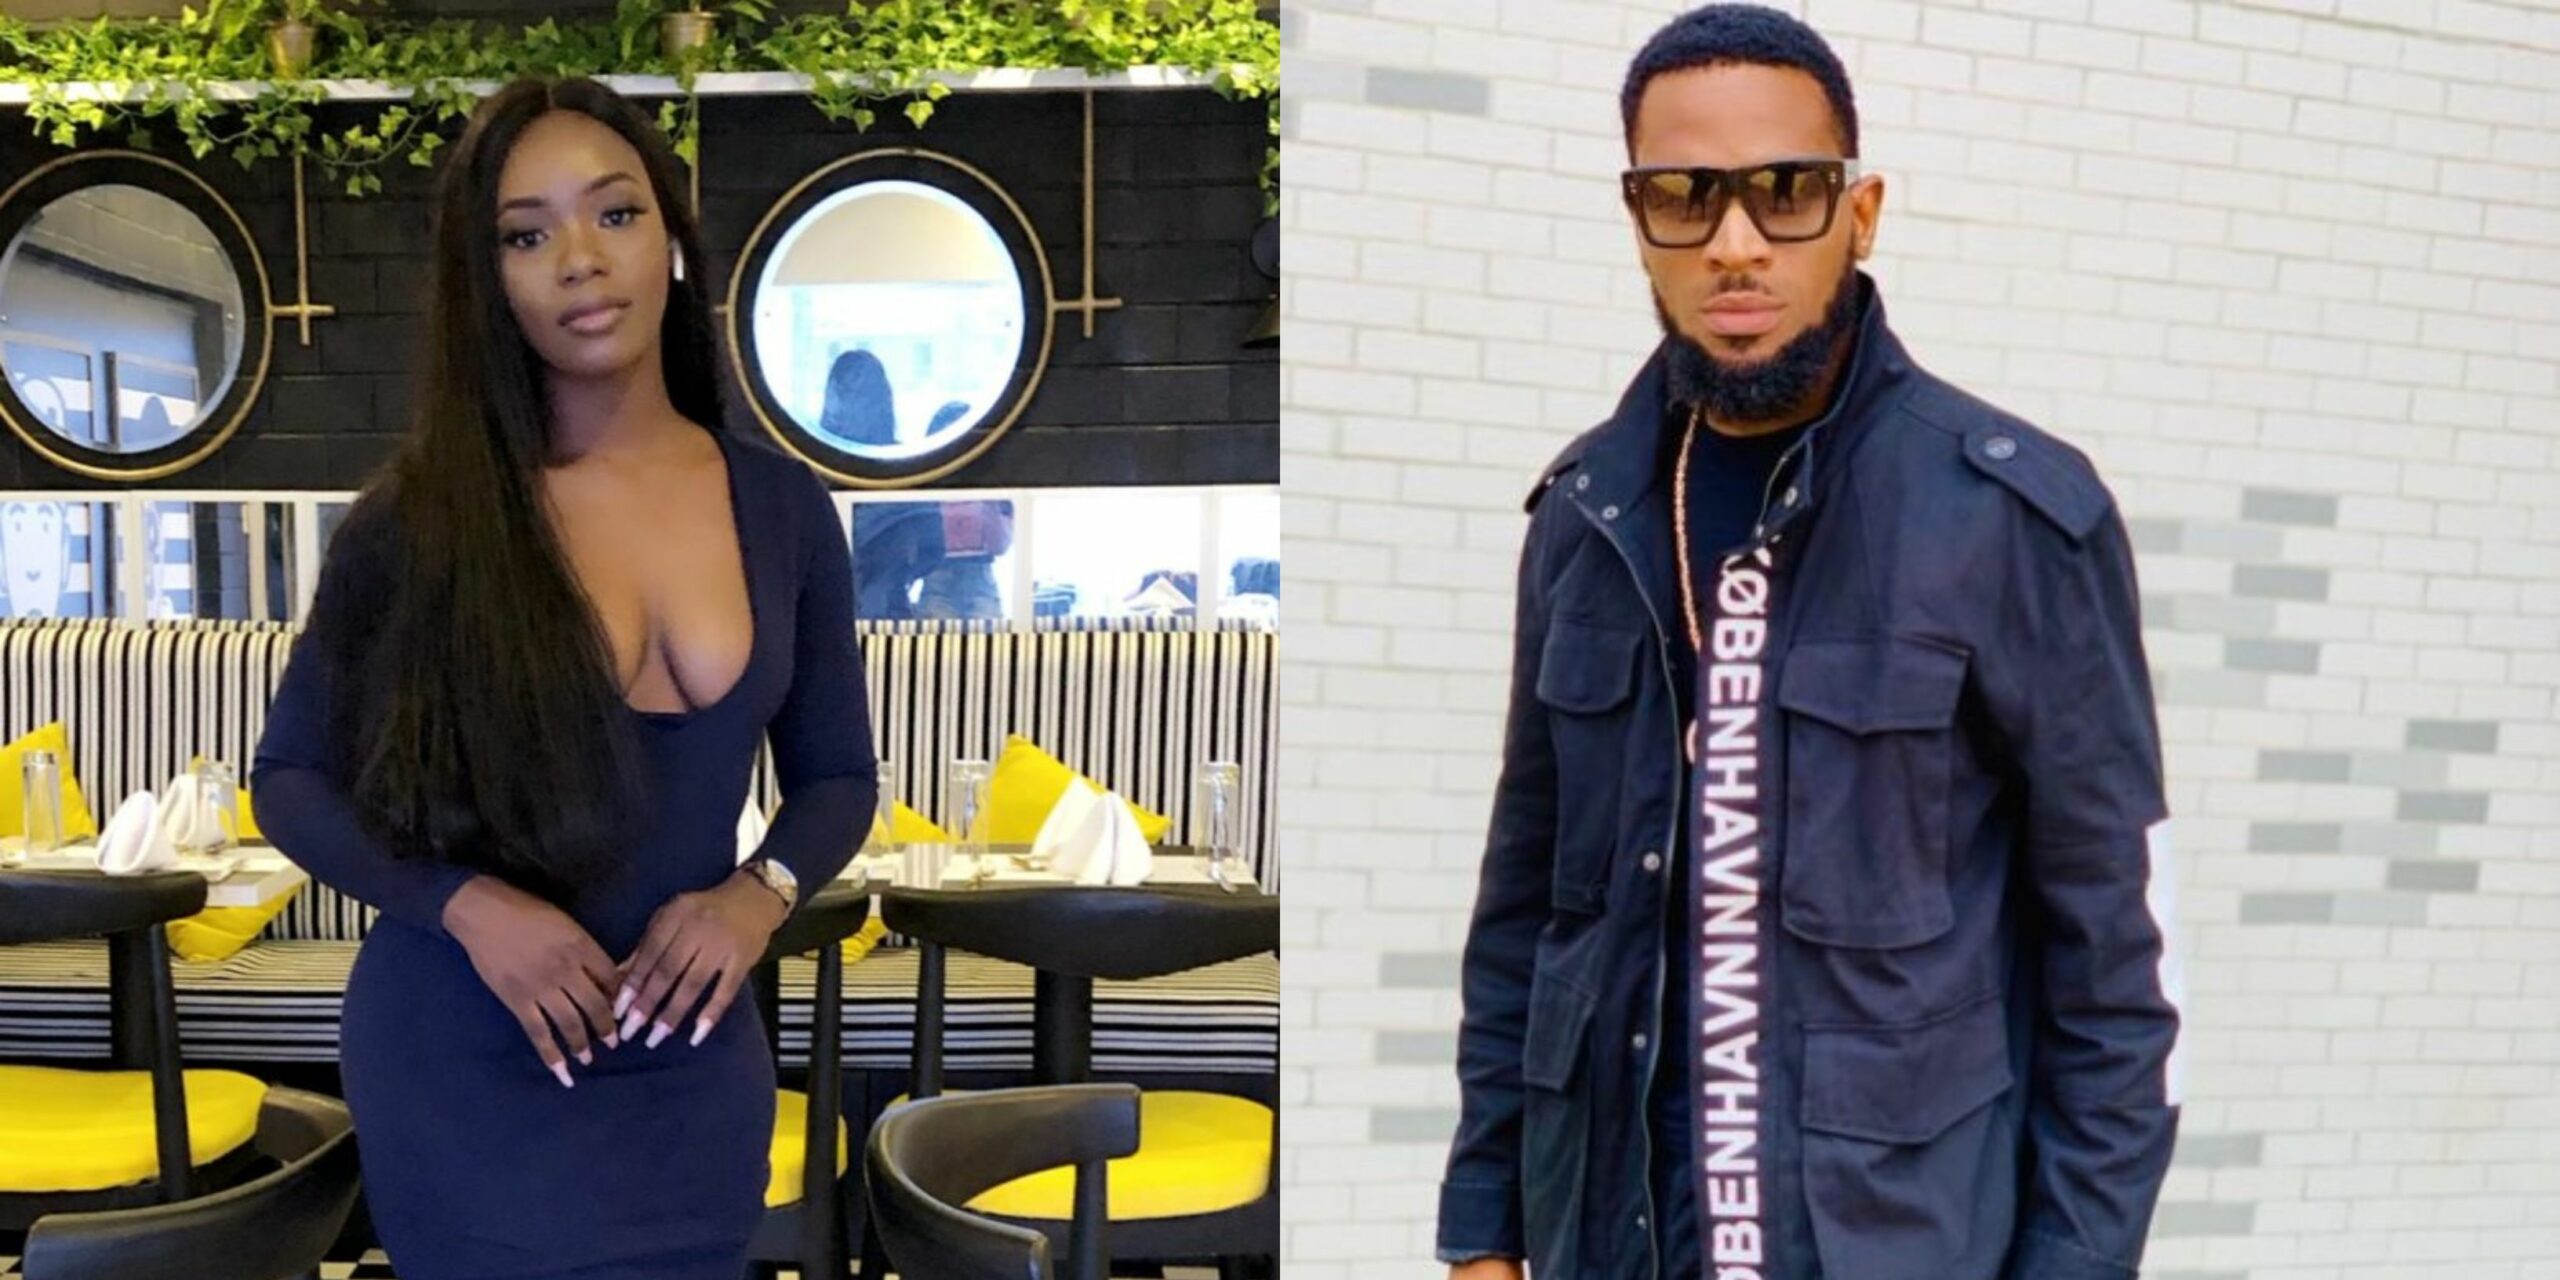 Lady who accused Dbanj of rape reveals herself, shares 2019 Whatsapp conversation about it